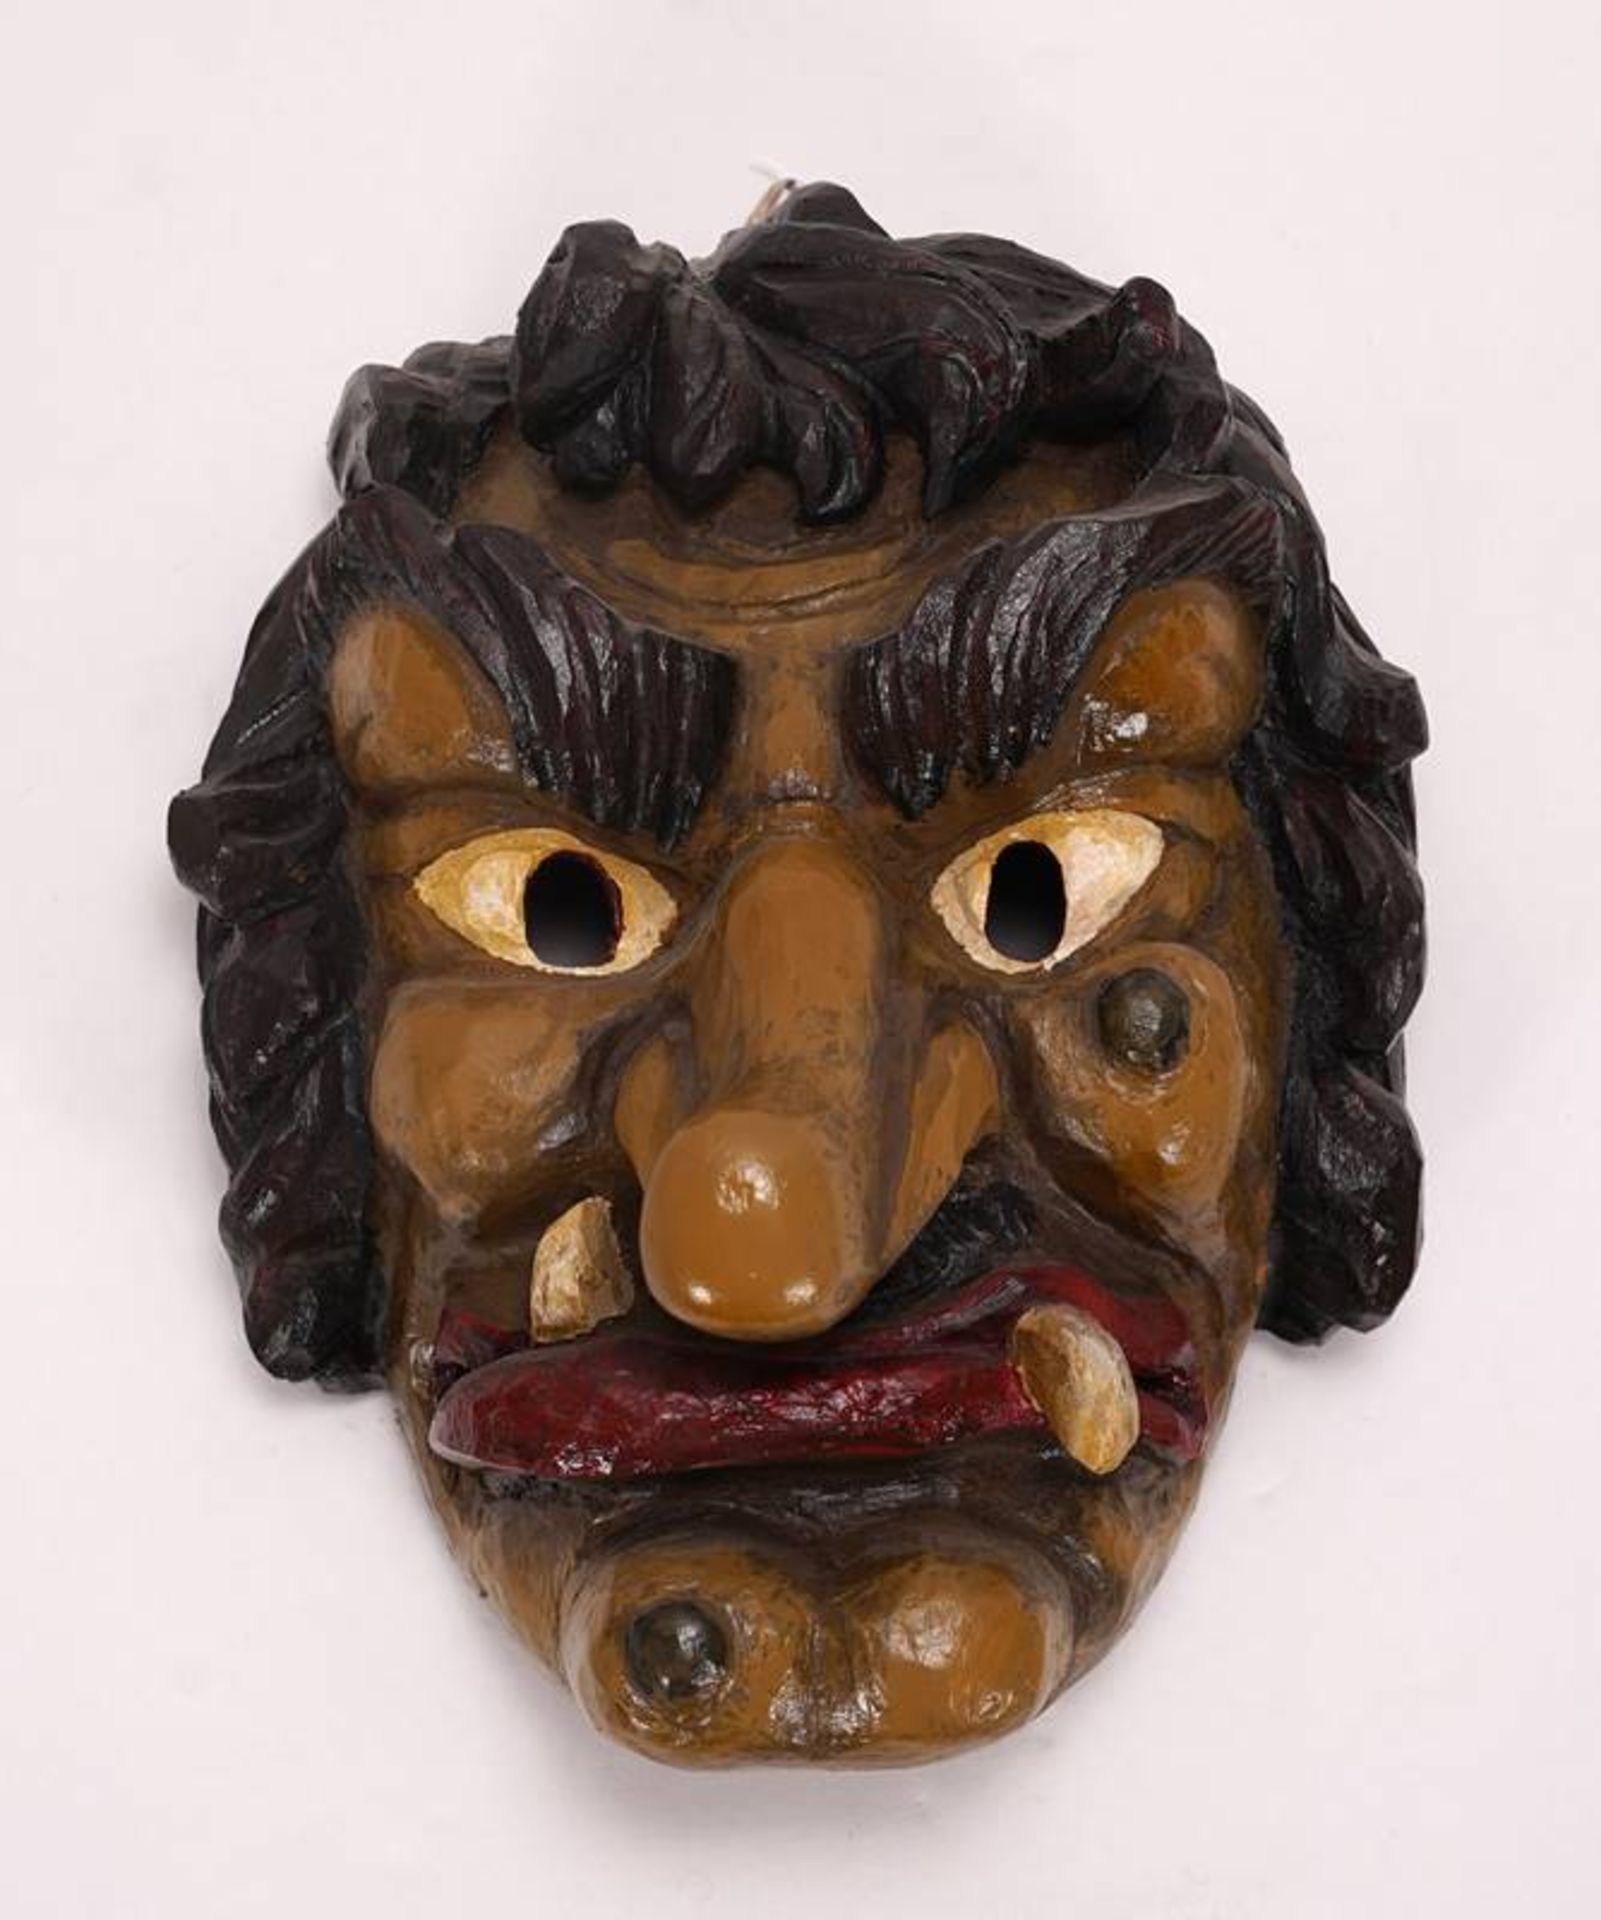 Mask of the Swabian-Alemannic Carnival